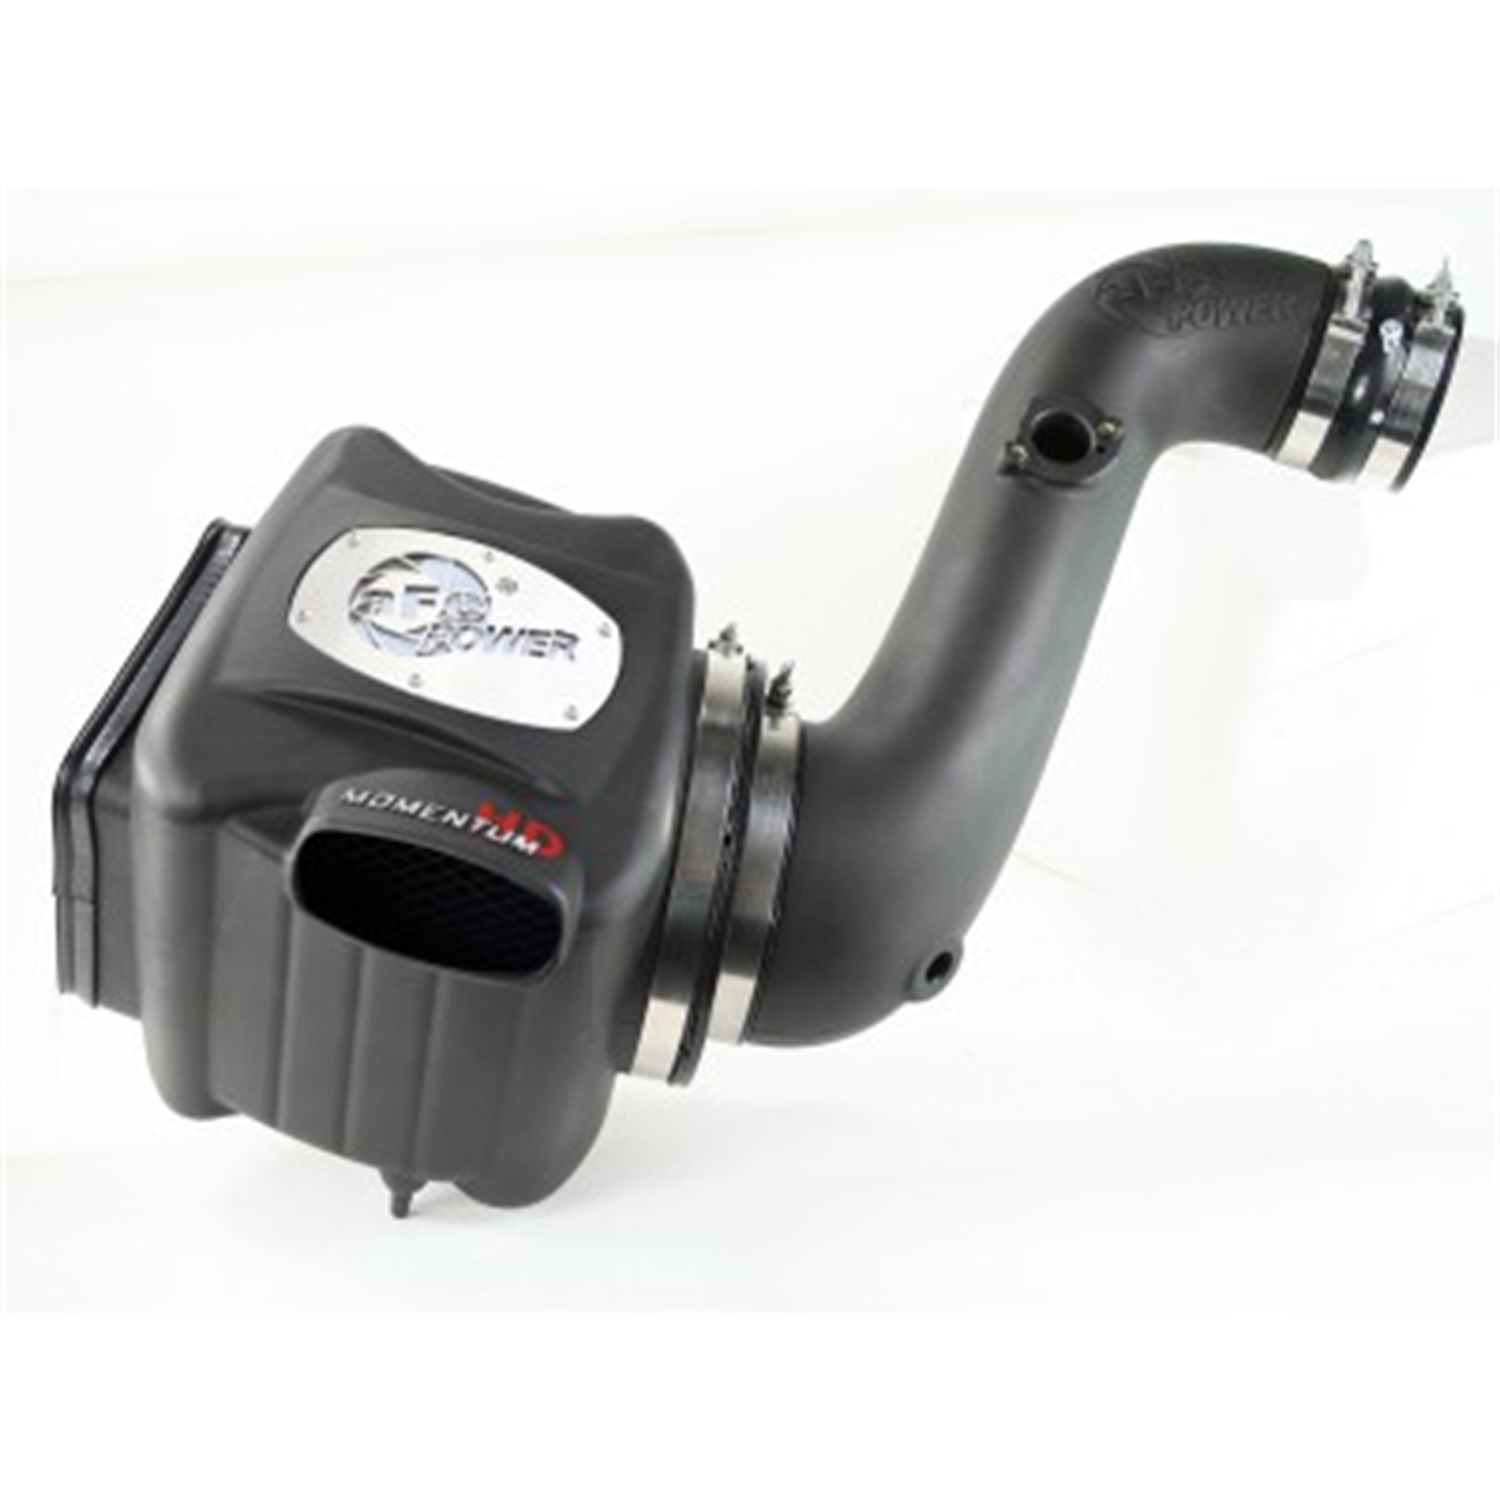 aFe Power aFe Power 75-74005 Momentum HD PRO GUARD 7 Stage-2 Si Intake System